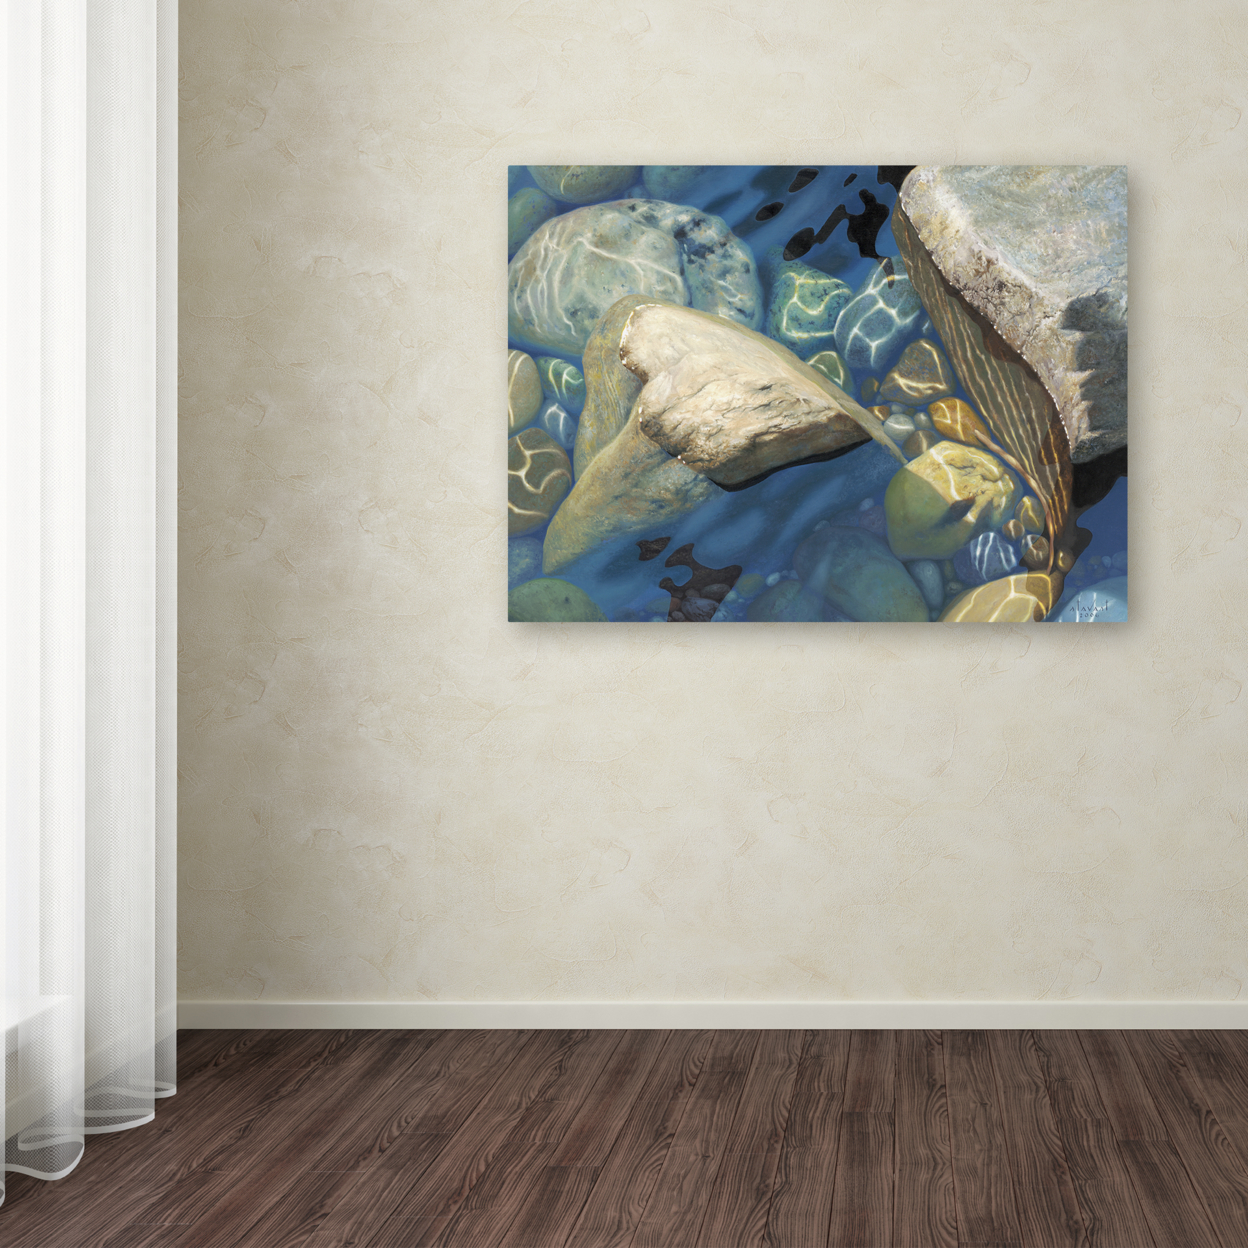 Stephen Stavast 'Blue Water Dance' Canvas Wall Art 35 X 47 Inches